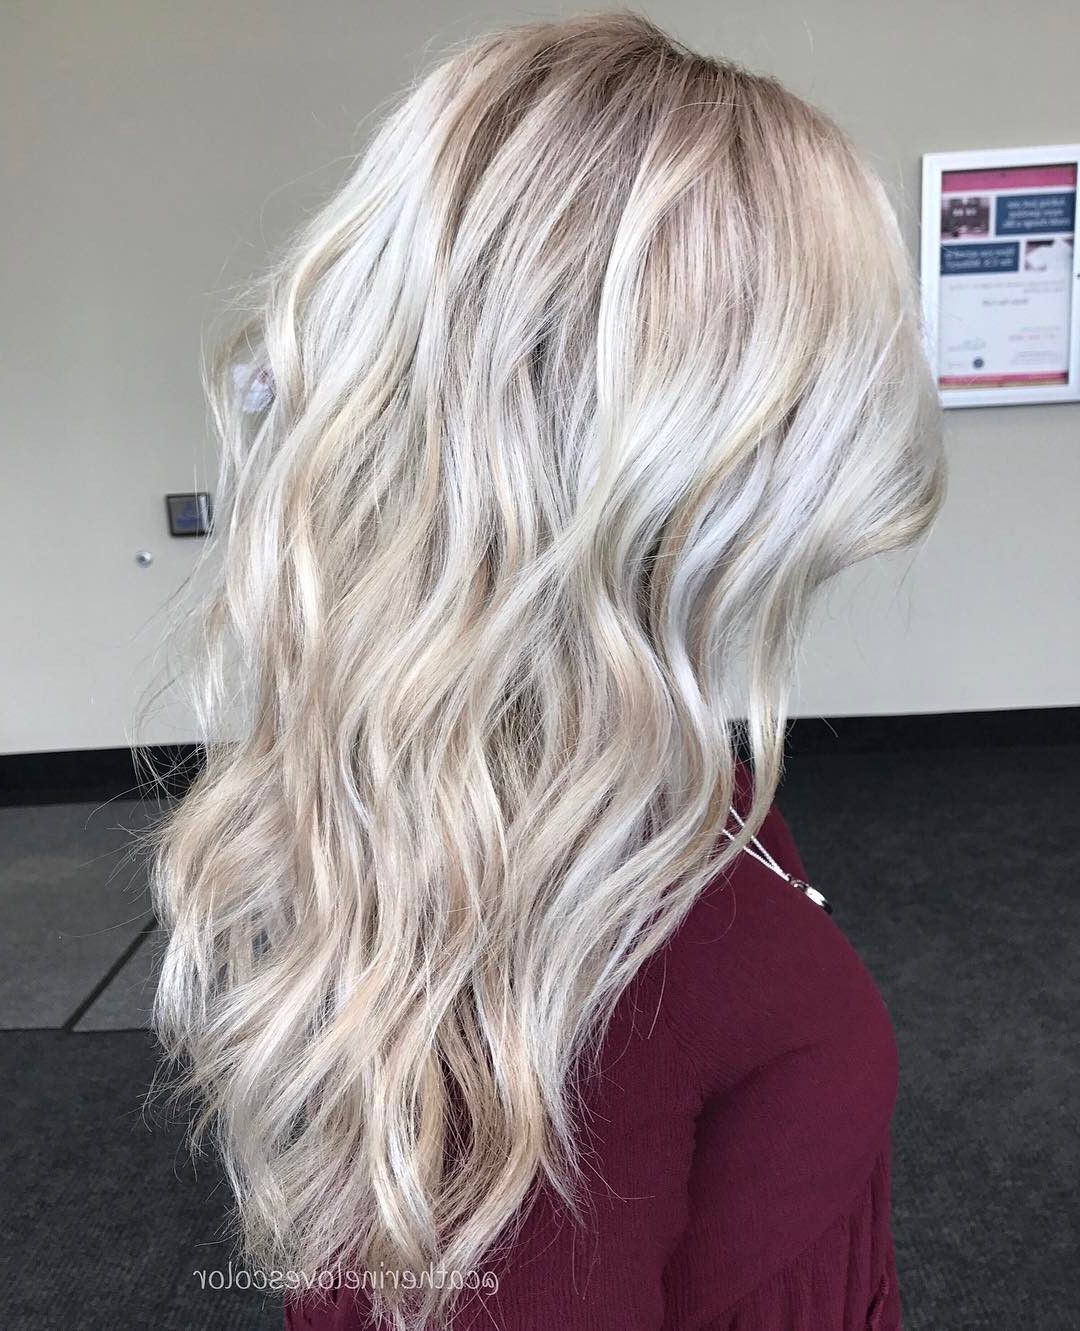 Fashionable Ash Blonde Medium Hairstyles Regarding 20 Adorable Ash Blonde Hairstyles To Try: Hair Color Ideas  (View 6 of 20)